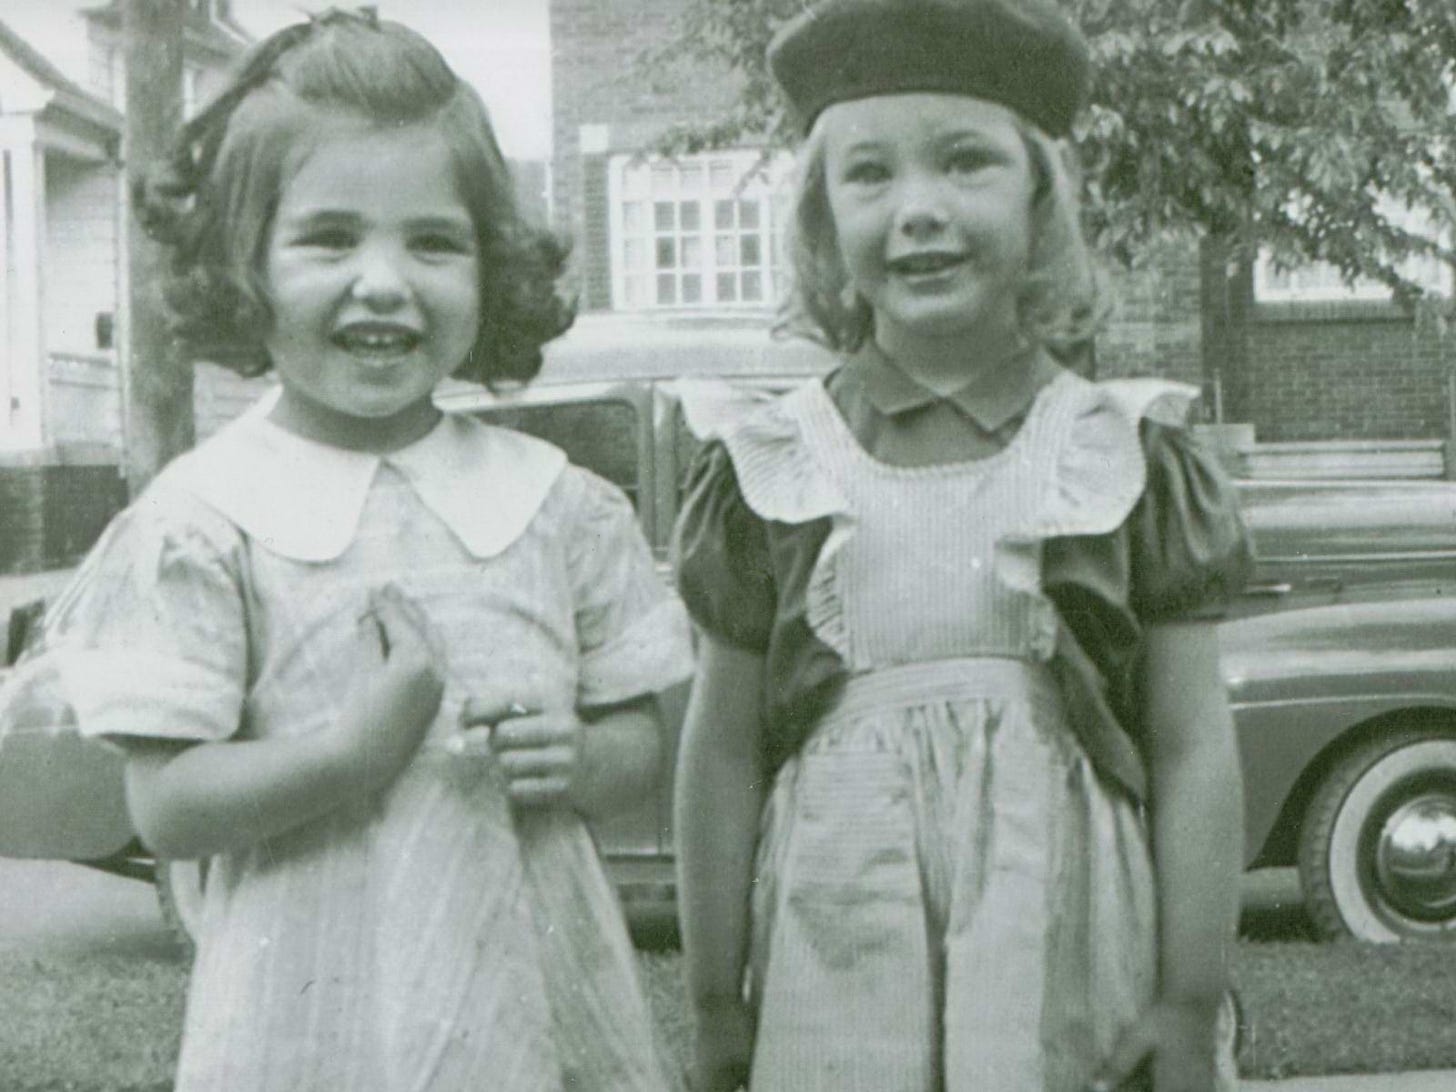 Two 3 year old girls standing on a sidewalk smiling, Marlee and Marciaon a 